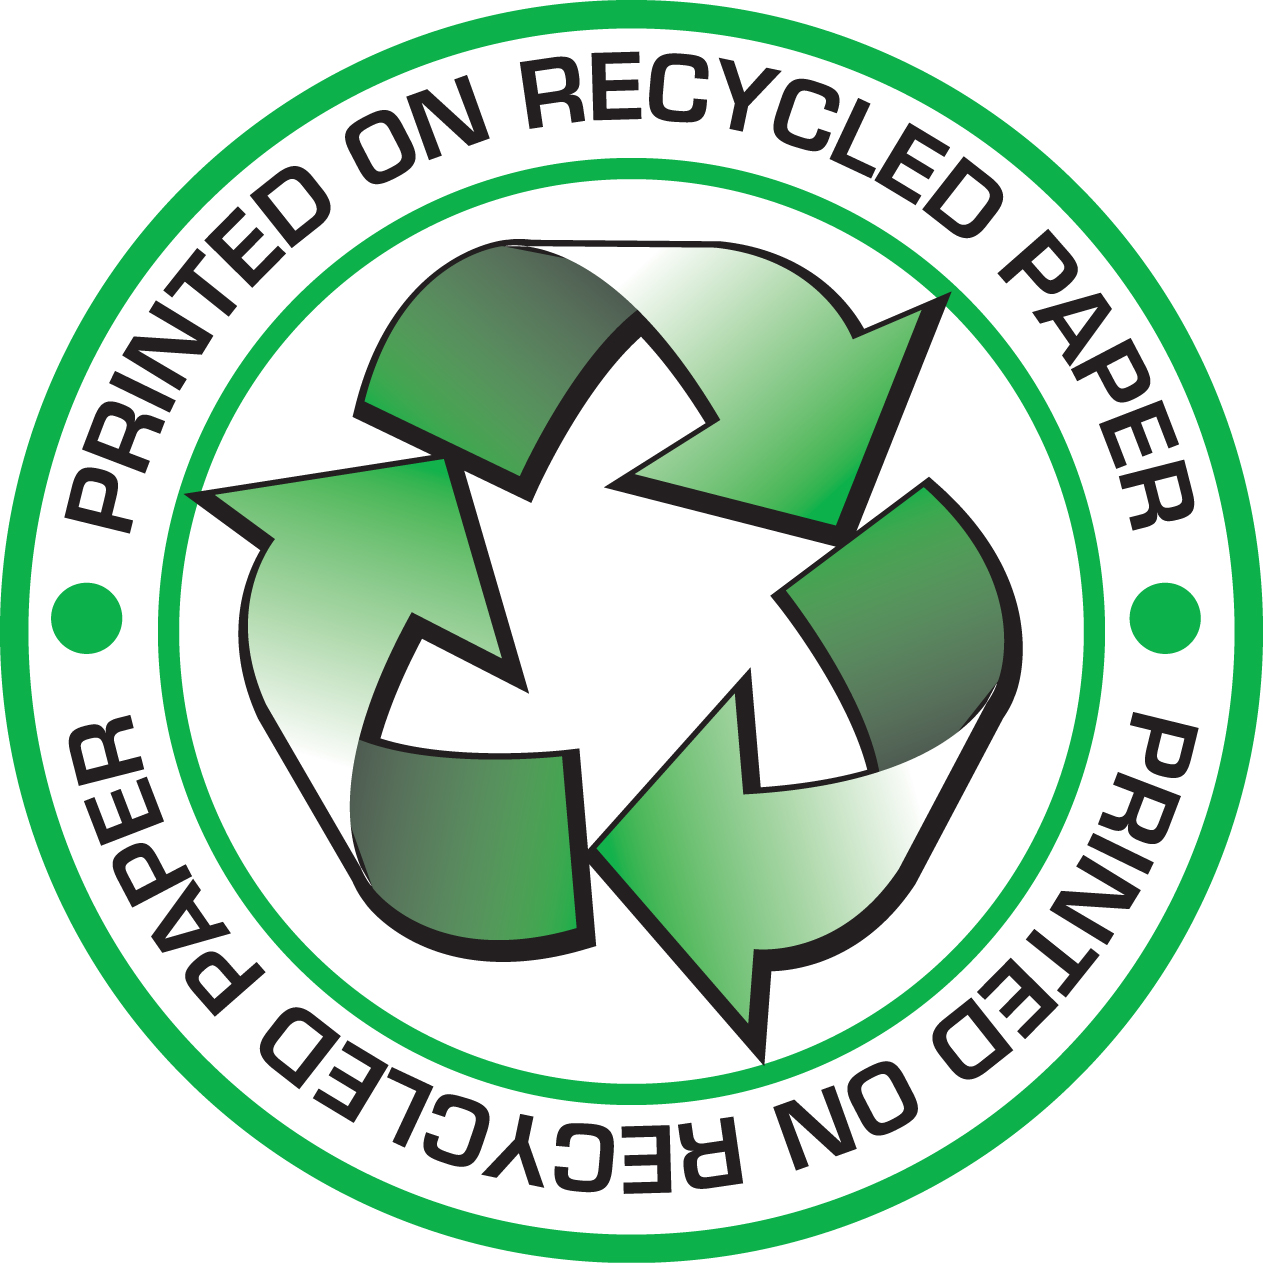 Recycle Logo For Paper - ClipArt Best